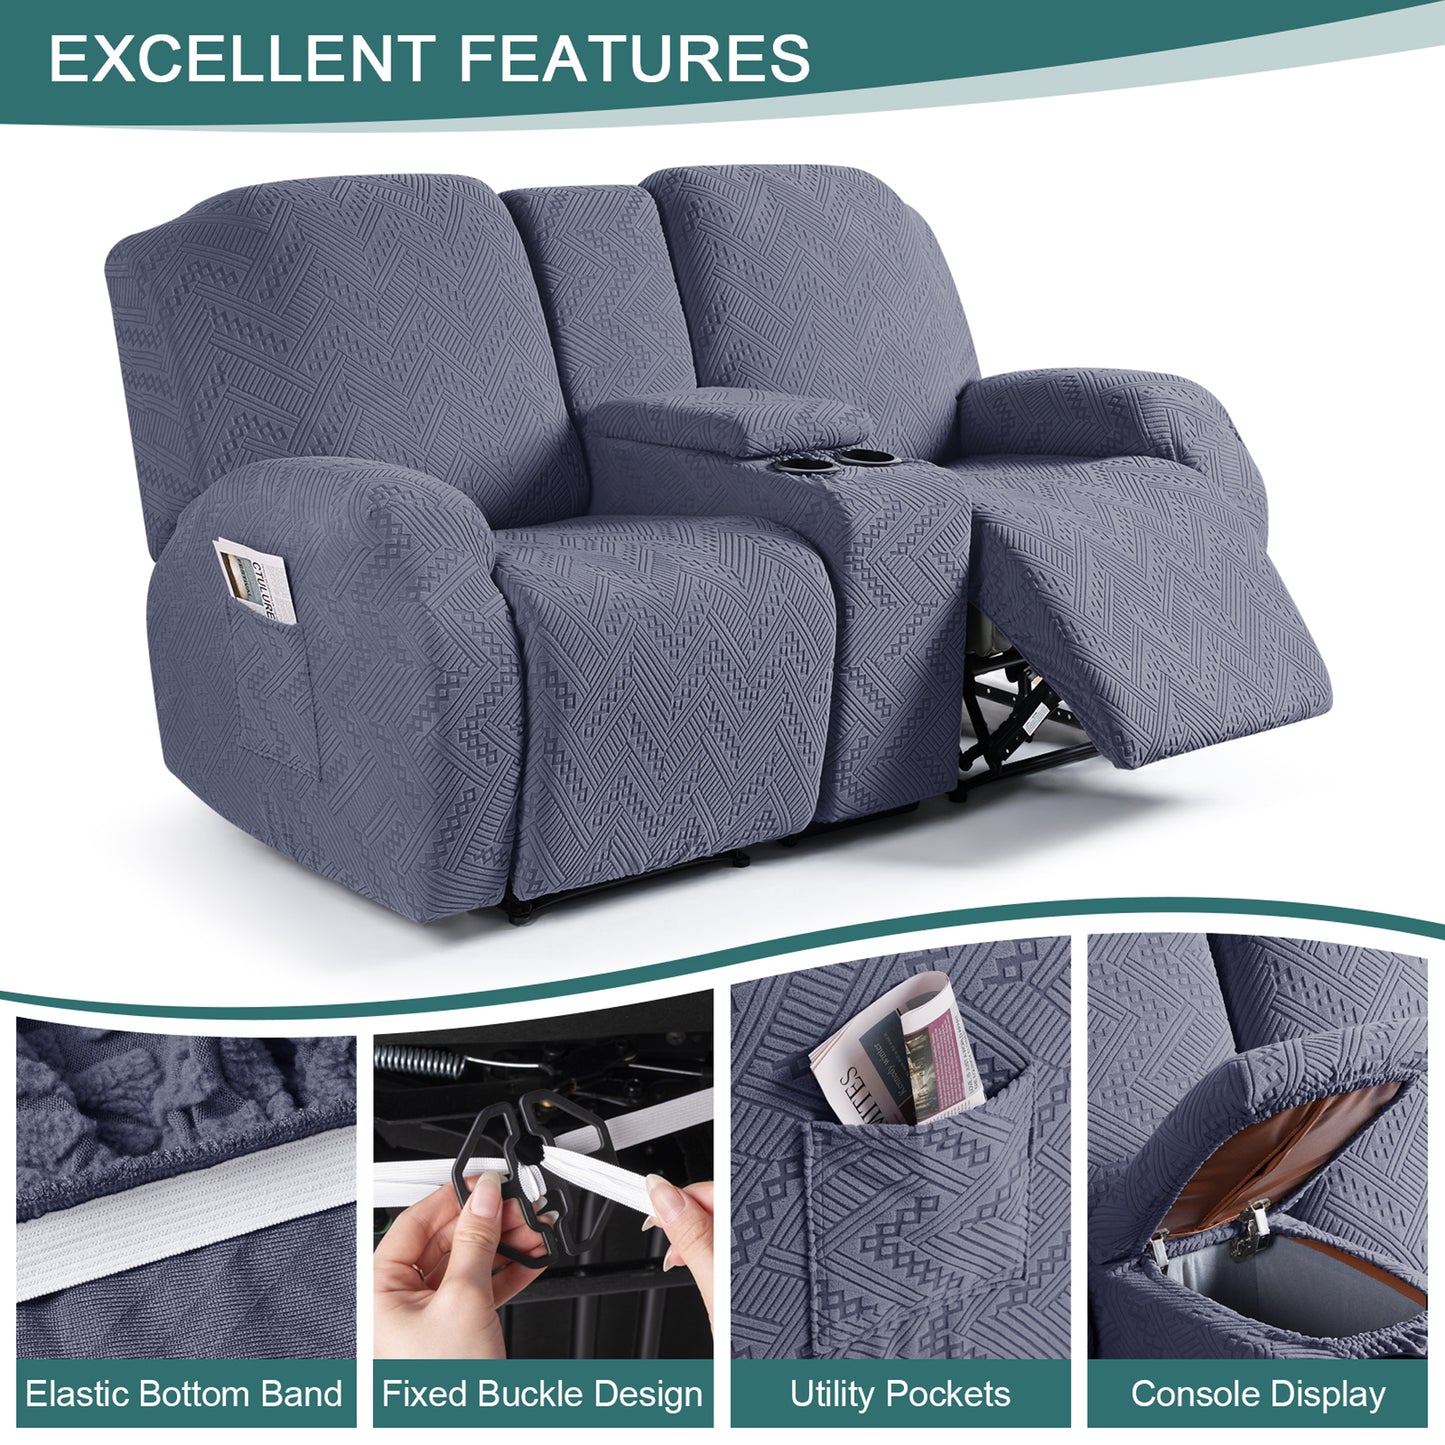 FENG LING GE 2 Seat Sofa Cover for Recliner with Console